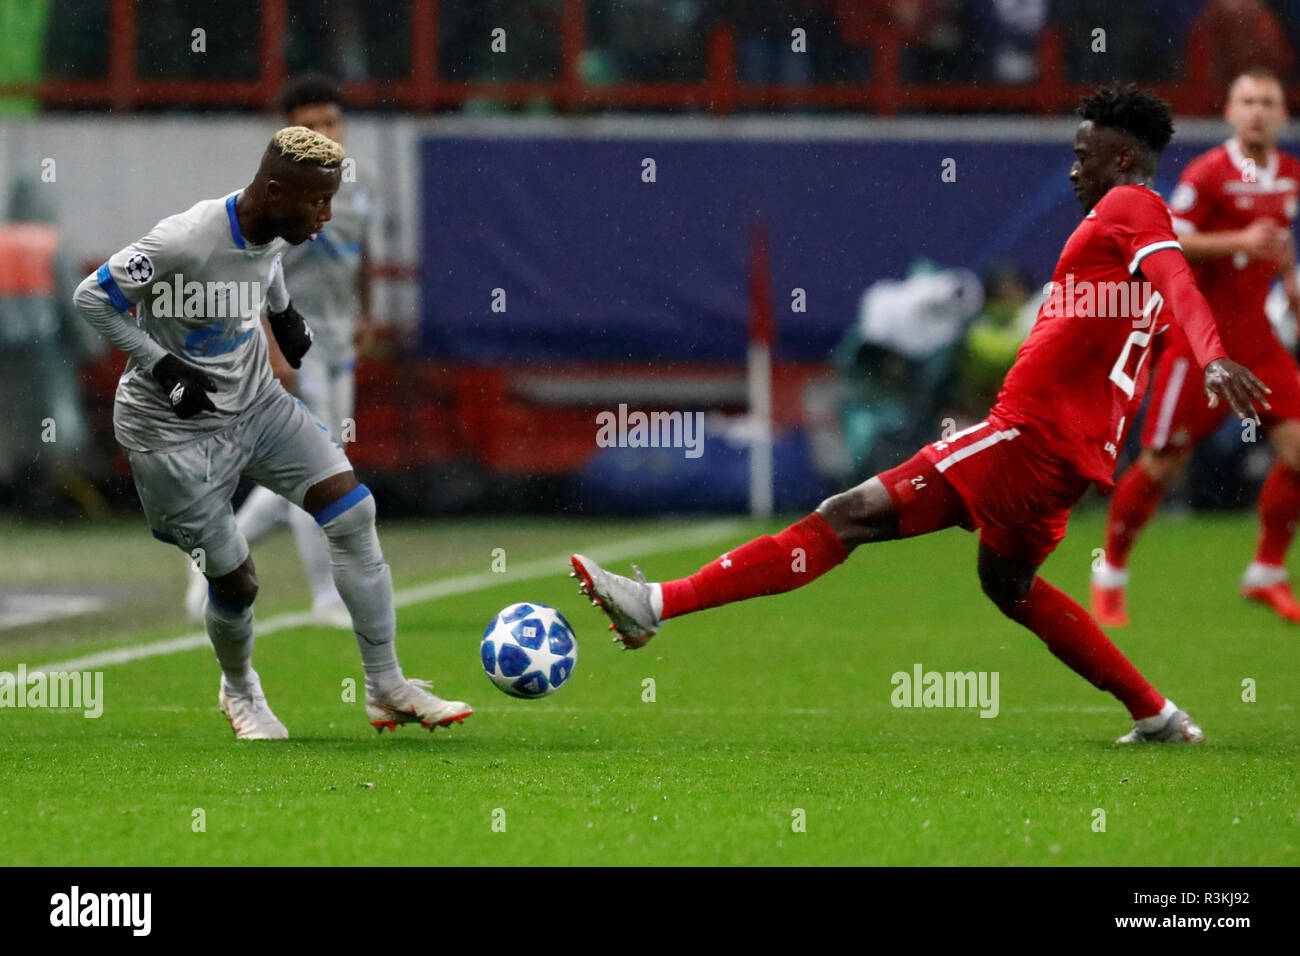 MOSCOW, RUSSIA - OCTOBER 03: Eder (R) of FC Lokomotiv Moscow and Hamza Mendyl of FC Schalke 04 vie for the ball during the Group D match of the UEFA Champions League between FC Lokomotiv Moscow and FC Schalke 04 at Lokomotiv Stadium on October 3, 2018 in Moscow, Russia. (MB Media) Stock Photo